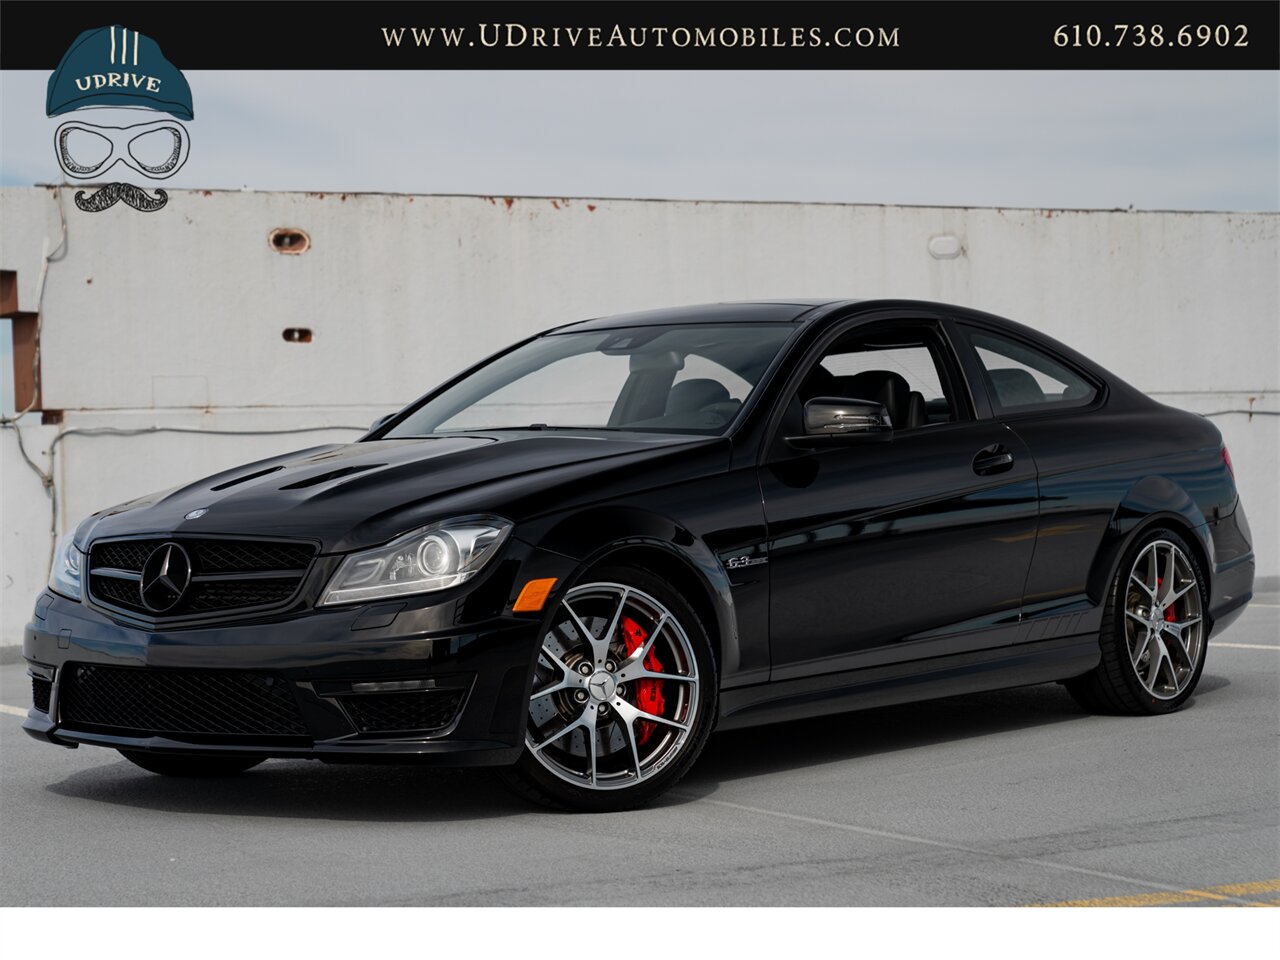 2015 Mercedes-Benz C63 AMG  Edition 507 17k Miles Pano Sunroof Locking Diff 507hp - Photo 1 - West Chester, PA 19382